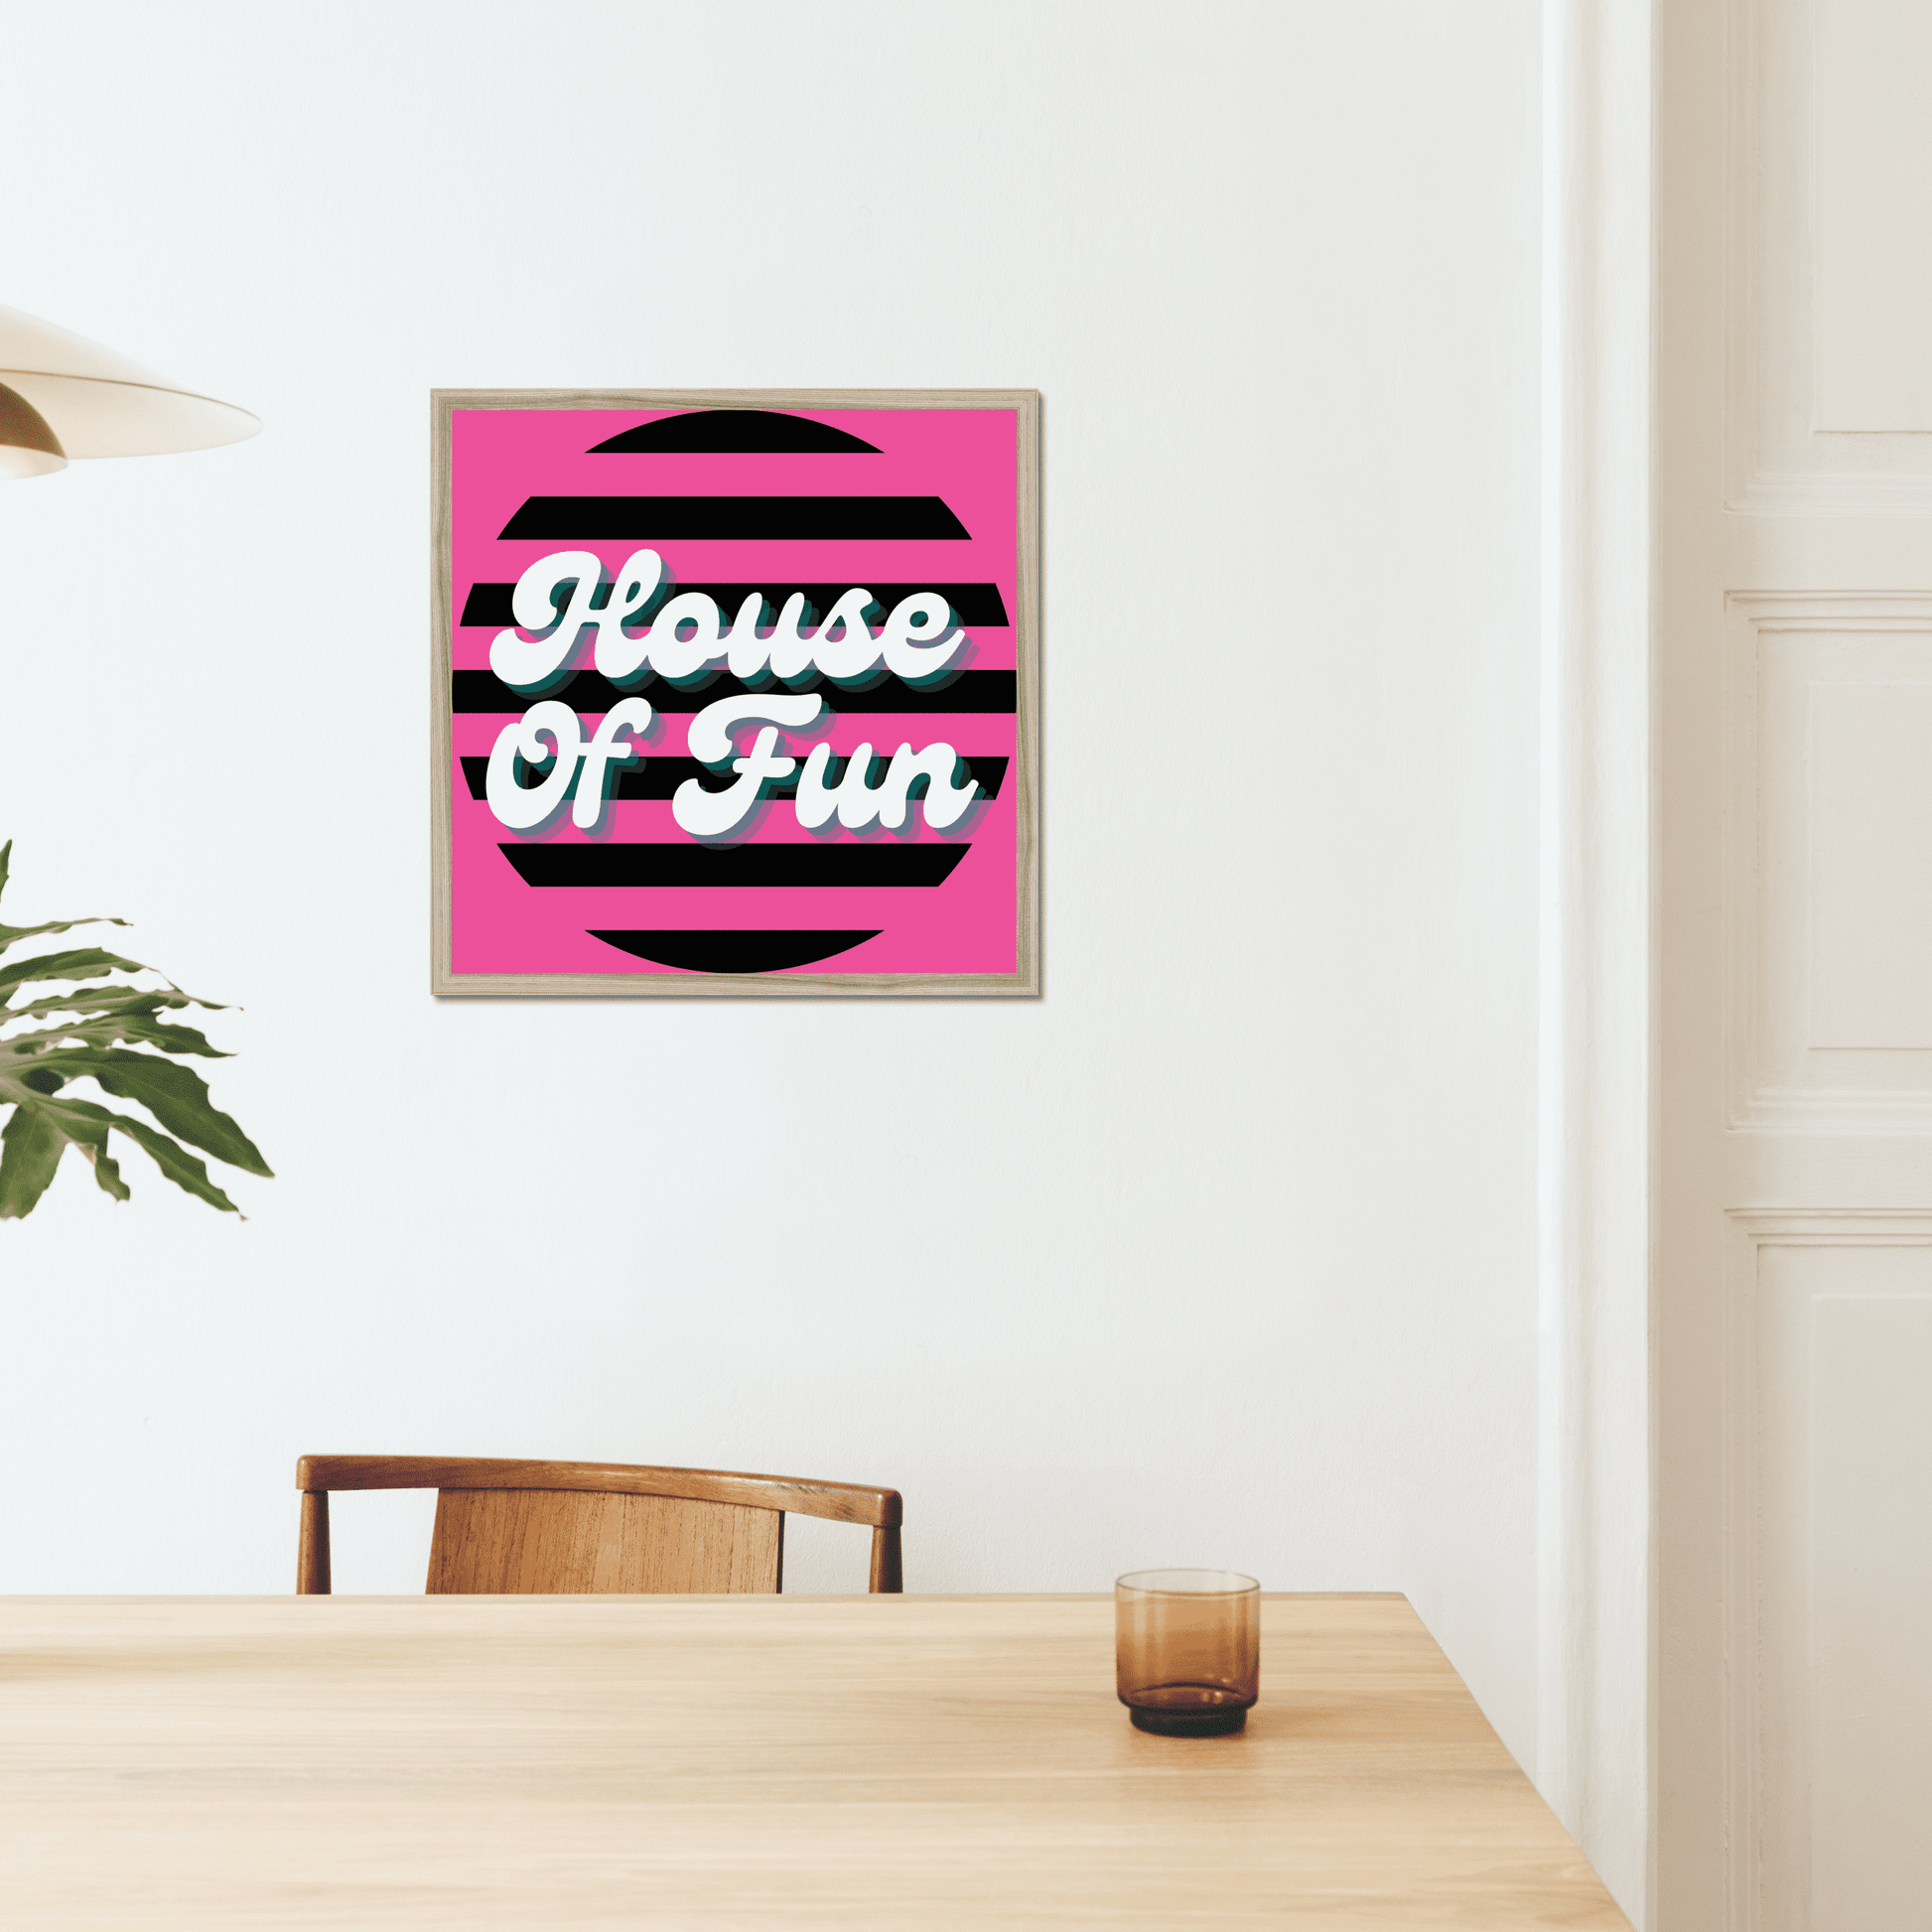 House of fun art print. A statement pink and black typography print that could hold its own on a totally clear wall space, or even work as part of a gallery wall.  This fun, bright, and quirky punk print is perfect for your party pad!